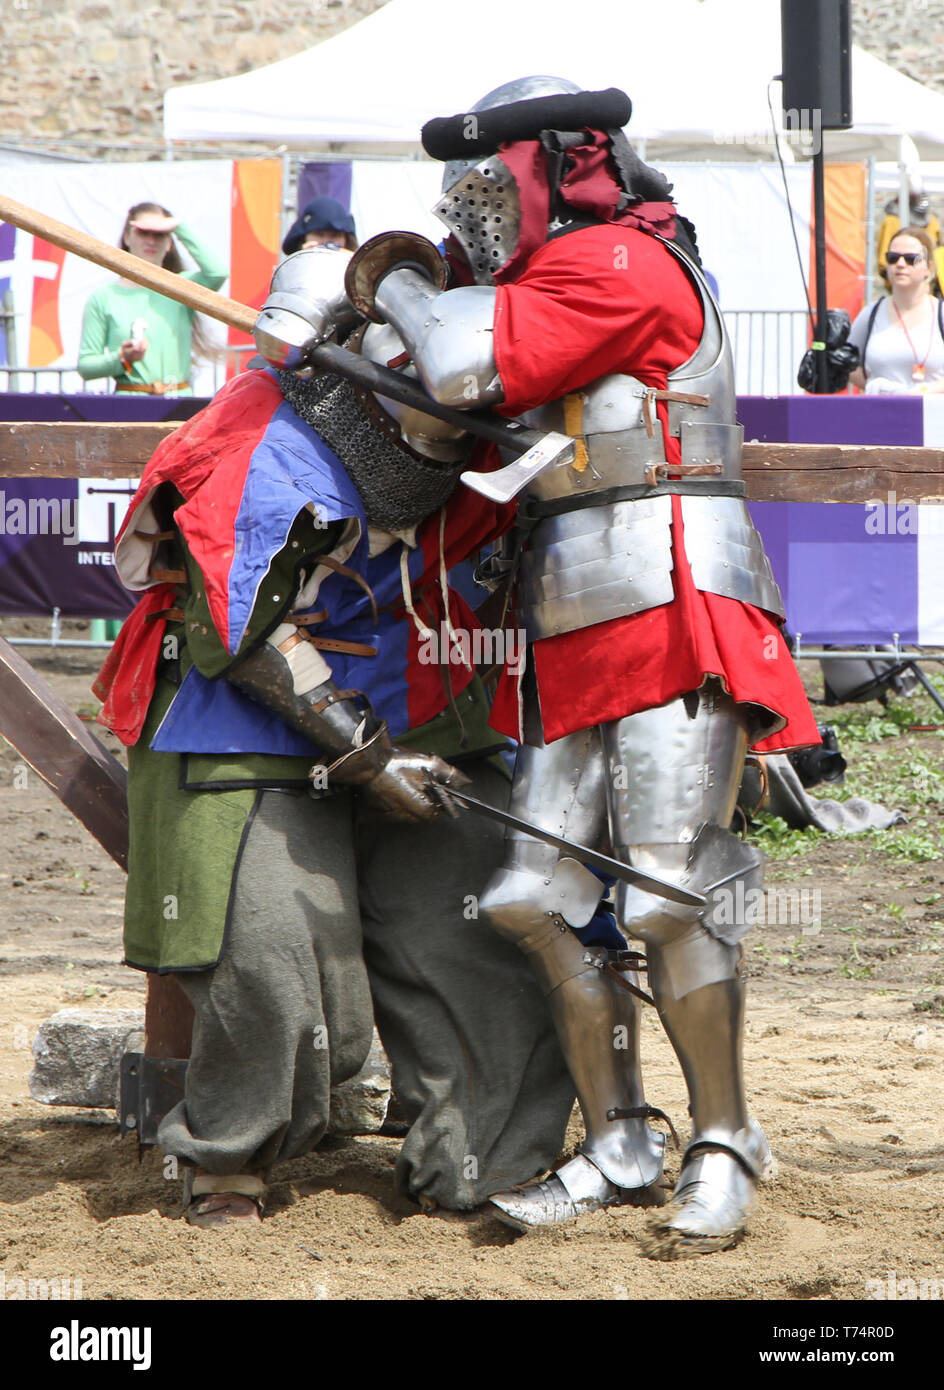 Smederevo. 2nd May, 2019. Two competitors clash at the opening day of the 10th World National HMB (Historic Medieval Battle) Championship in Smederevo, Serbia on May 2, 2019. Fighters from 40 countries gathered in the Serbian city of Smederevo for an unusual international tournament that recreates historic battle techniques-the World National HMB Championship. The Chinese team is made up of 27 members, and it is China's third appearance at the event. Credit: Nemanja Cabric/Xinhua/Alamy Live News Stock Photo